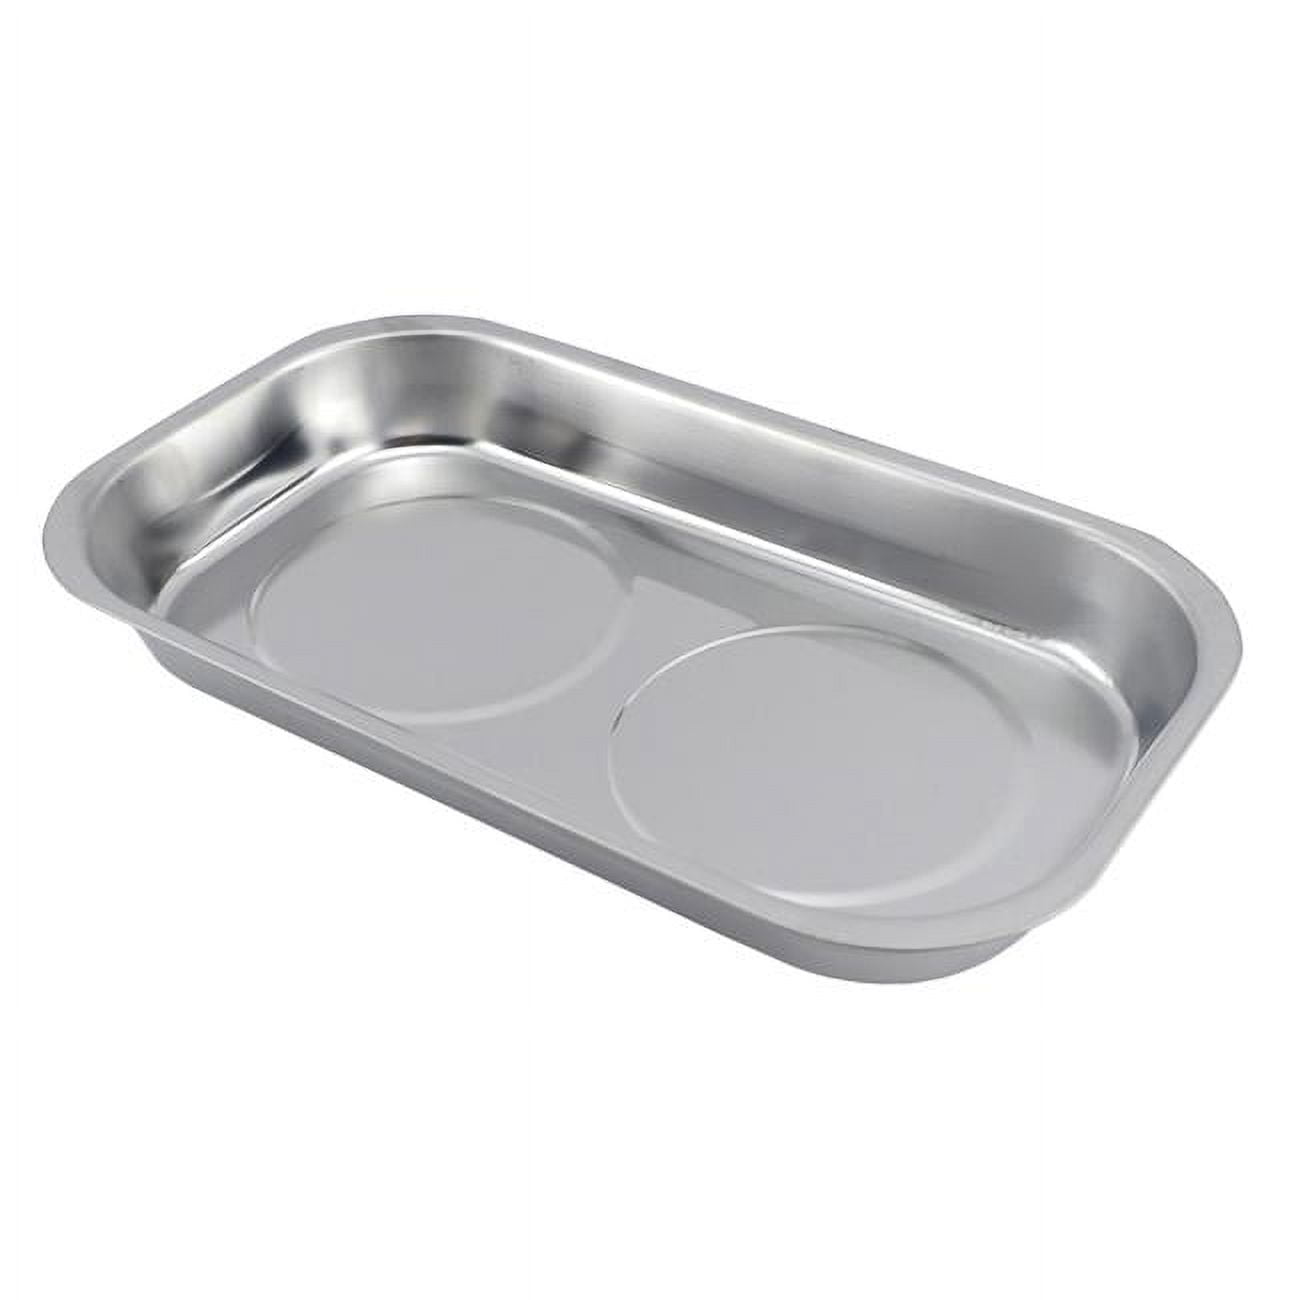 2501401 9.5 In. Stainless Steel 3.4 Mgoe Magnetic Tray, Silver - Case Of 3